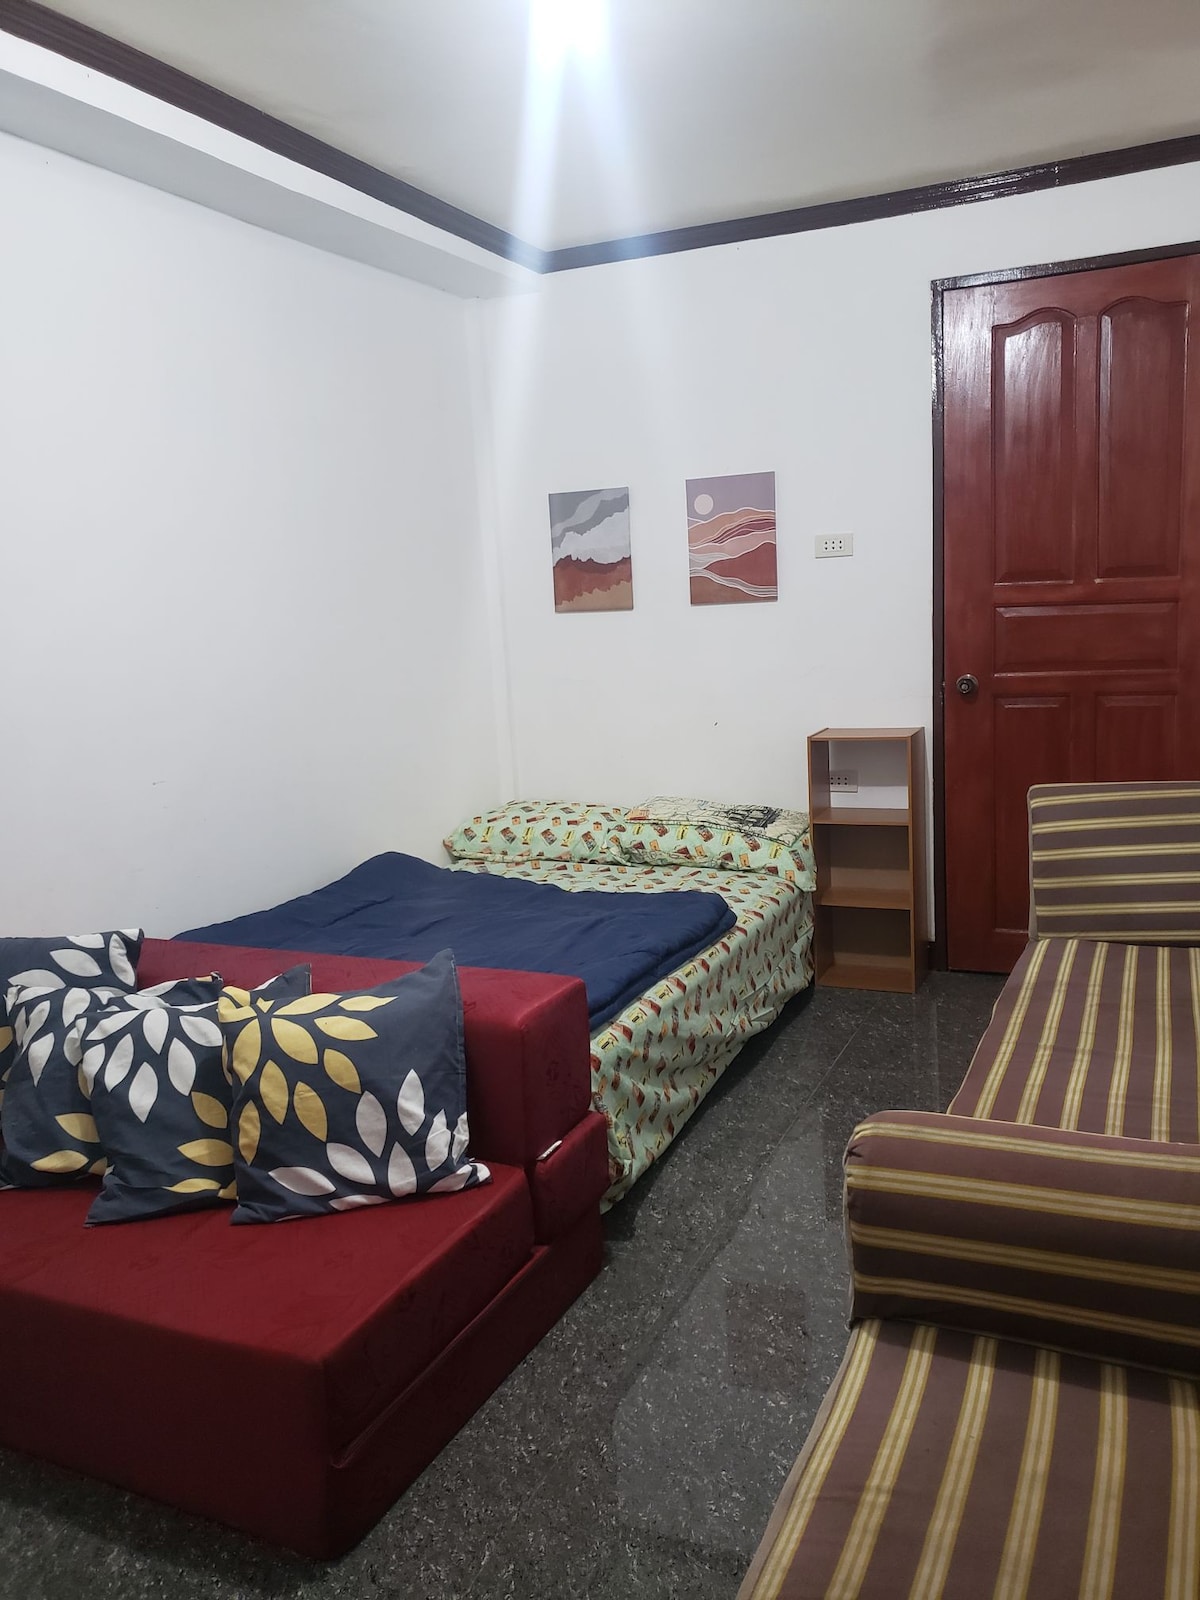 Pikas Balai: Private guesthouse at city center